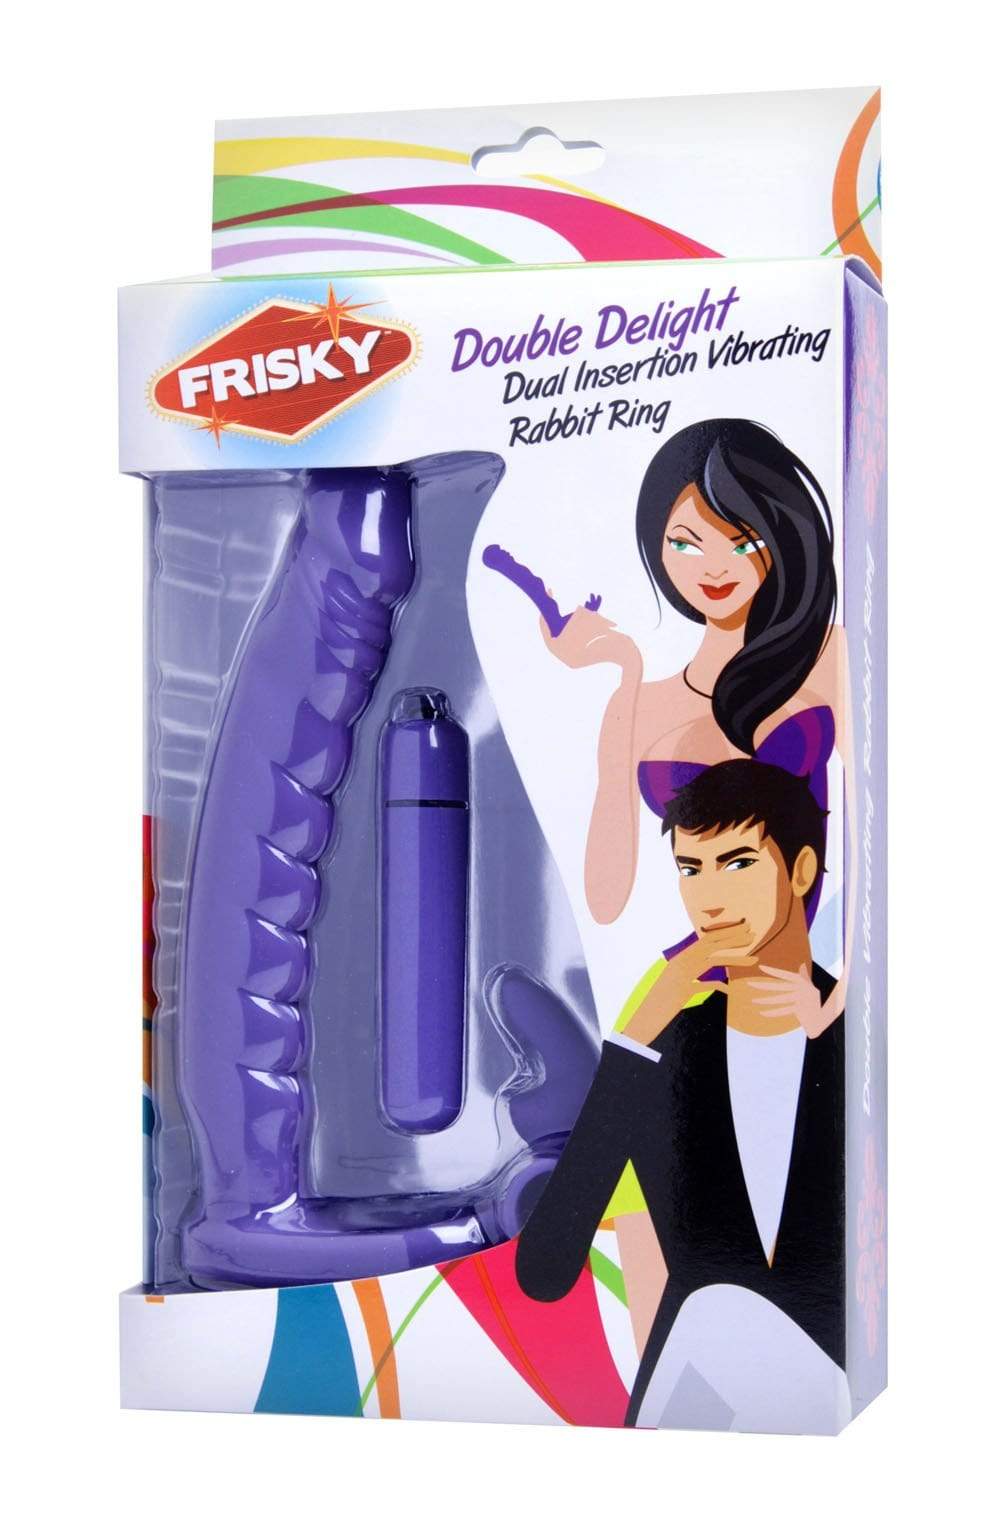 double delight dual insertion vibrating rabbit cock ring